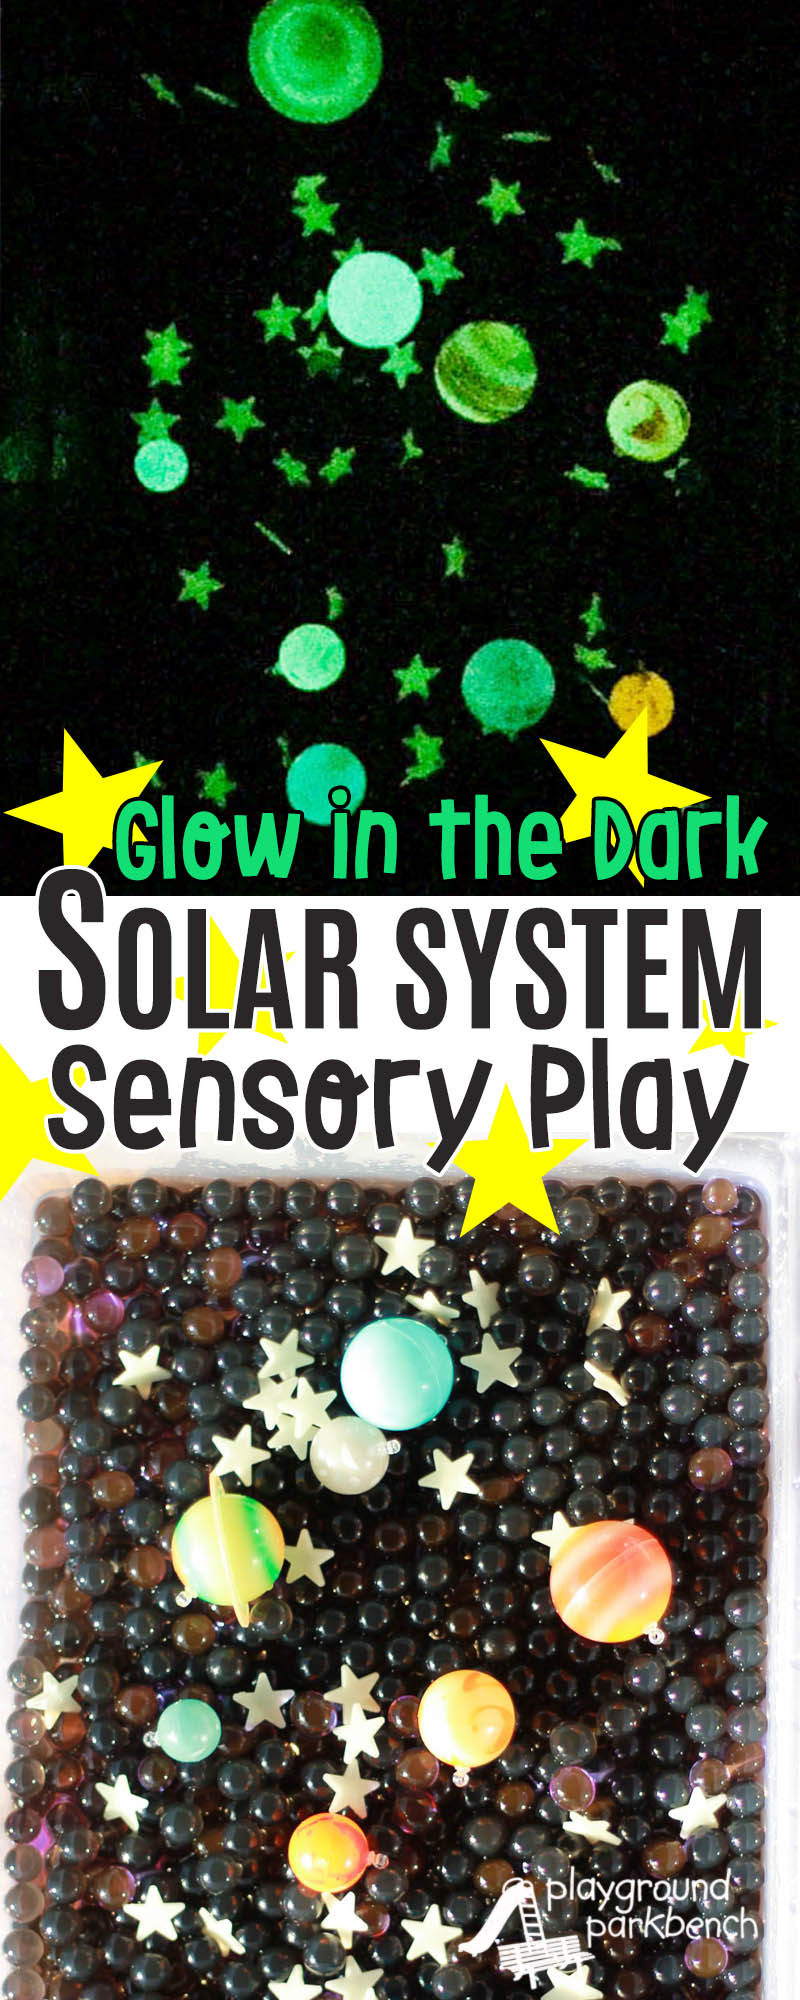 Let your little astronaut learn about the solar system through hands-on sensory play with this Glow in the Dark Space Sensory Bin! They can imagine they are an astronaut, exploring outer space, count and order the planets, create their own star formations or re-create constellations and more. Simple set up features water beads and glow in the dark stars and planets. Set yours up today for hours of deep space exploration! | Toddlers | Preschool | Elementary | Totschool | Sensory Play | Hands On Learning | Learning Through Play | STEM | STEAM | Space |